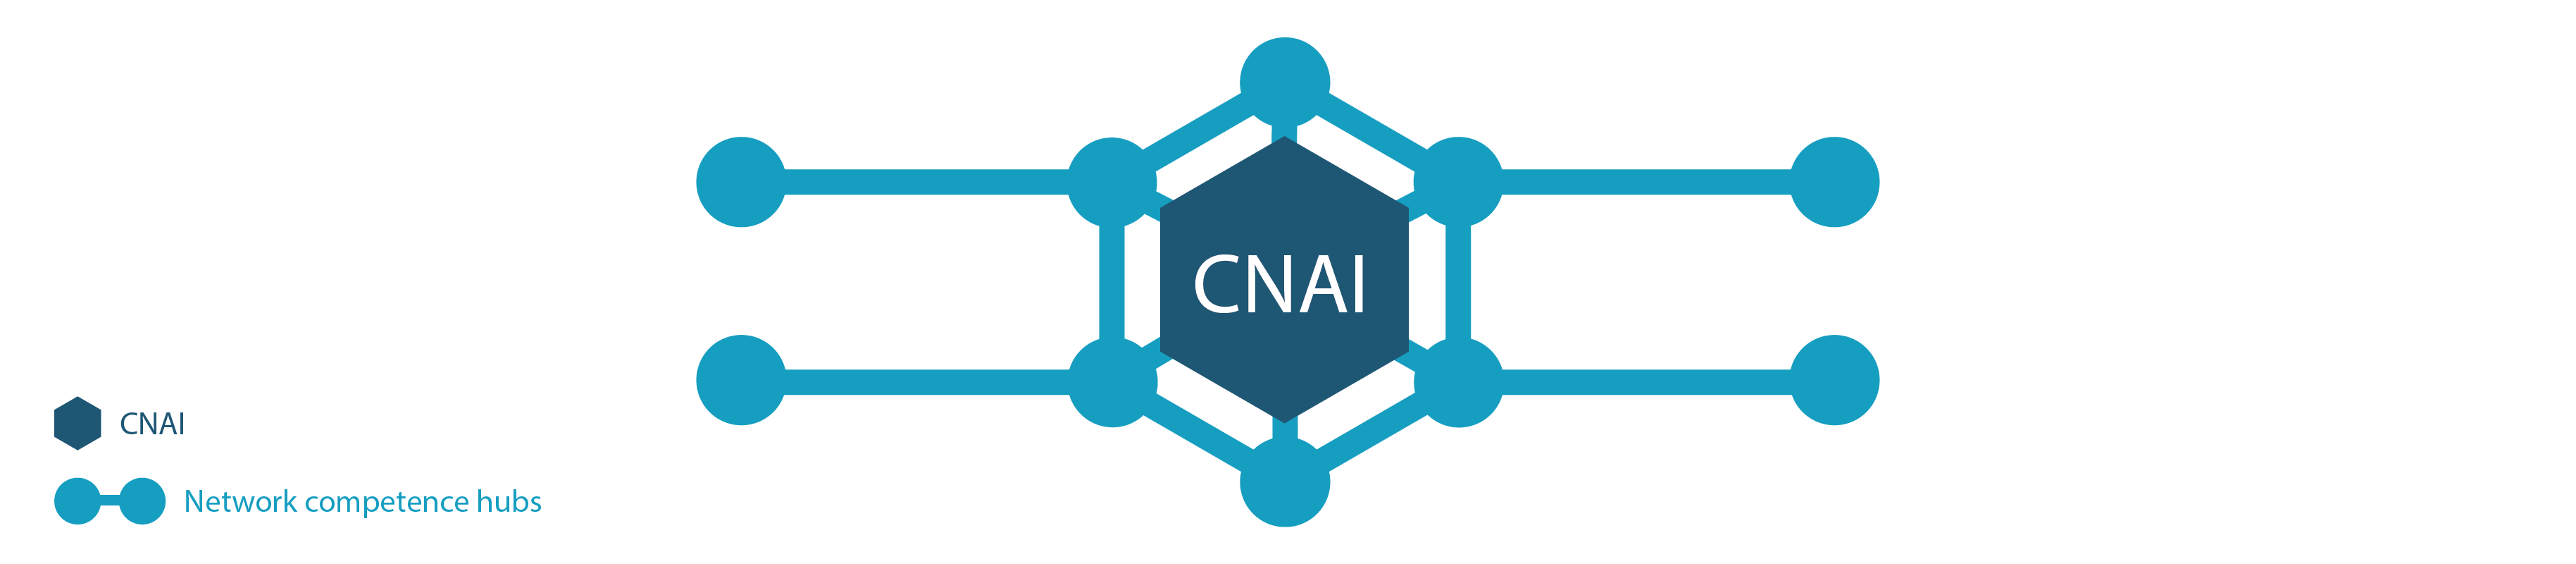 Illustration of the network. CNAI in the center, network nodes around it